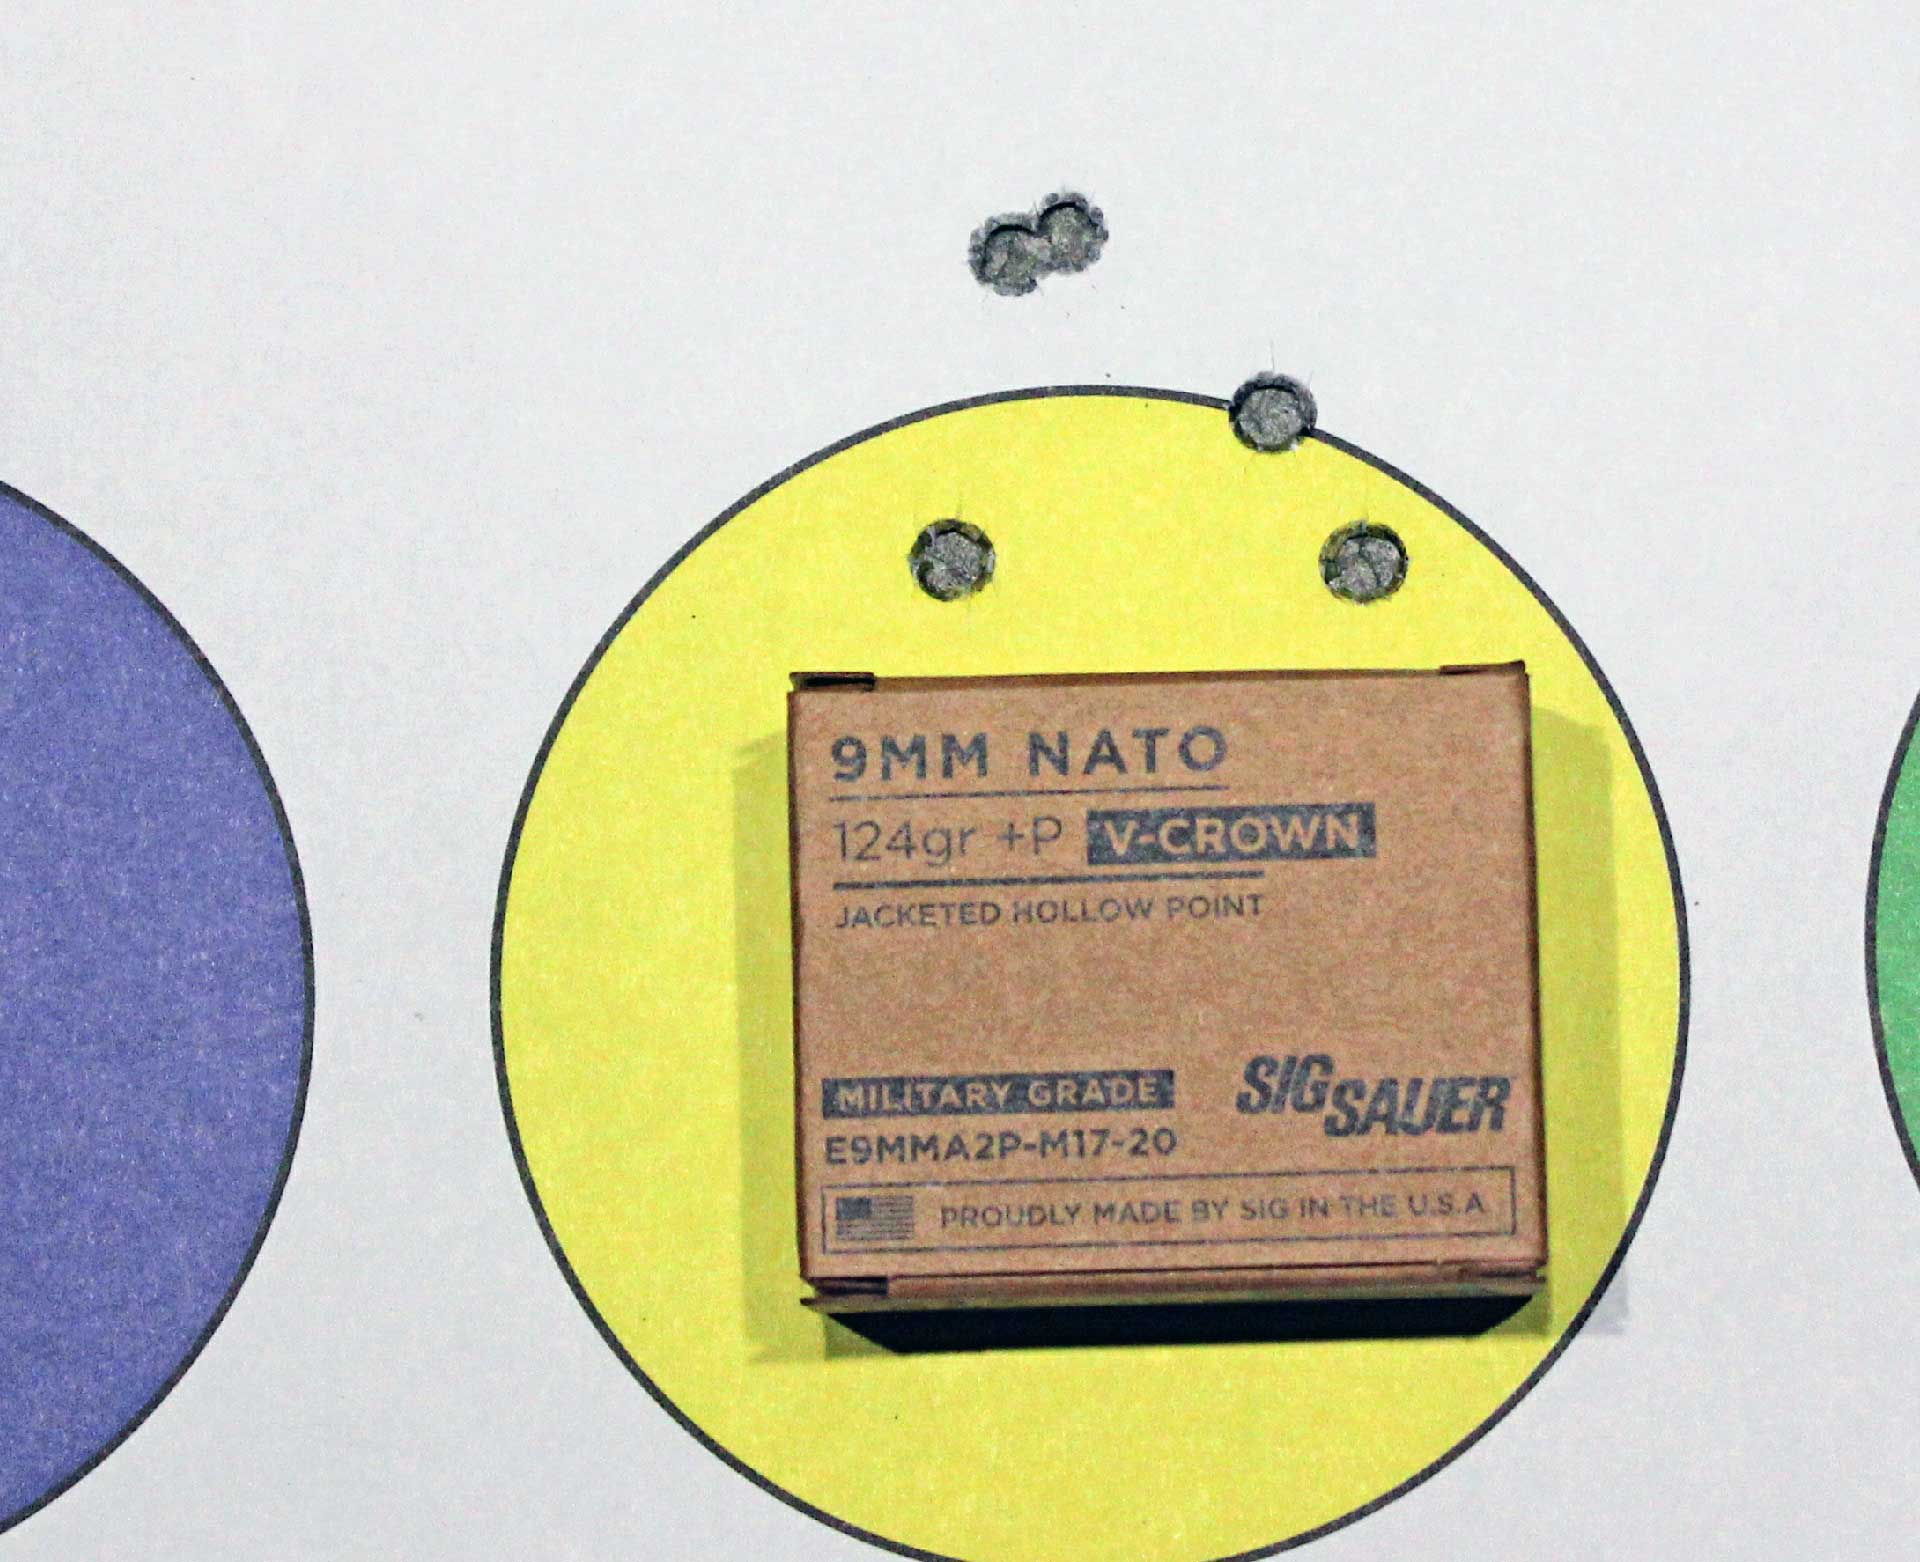 Bullet holes in a yellow circular target above a box of SIG Sauer M17 V-Crown 9 mm Luger ammunition.